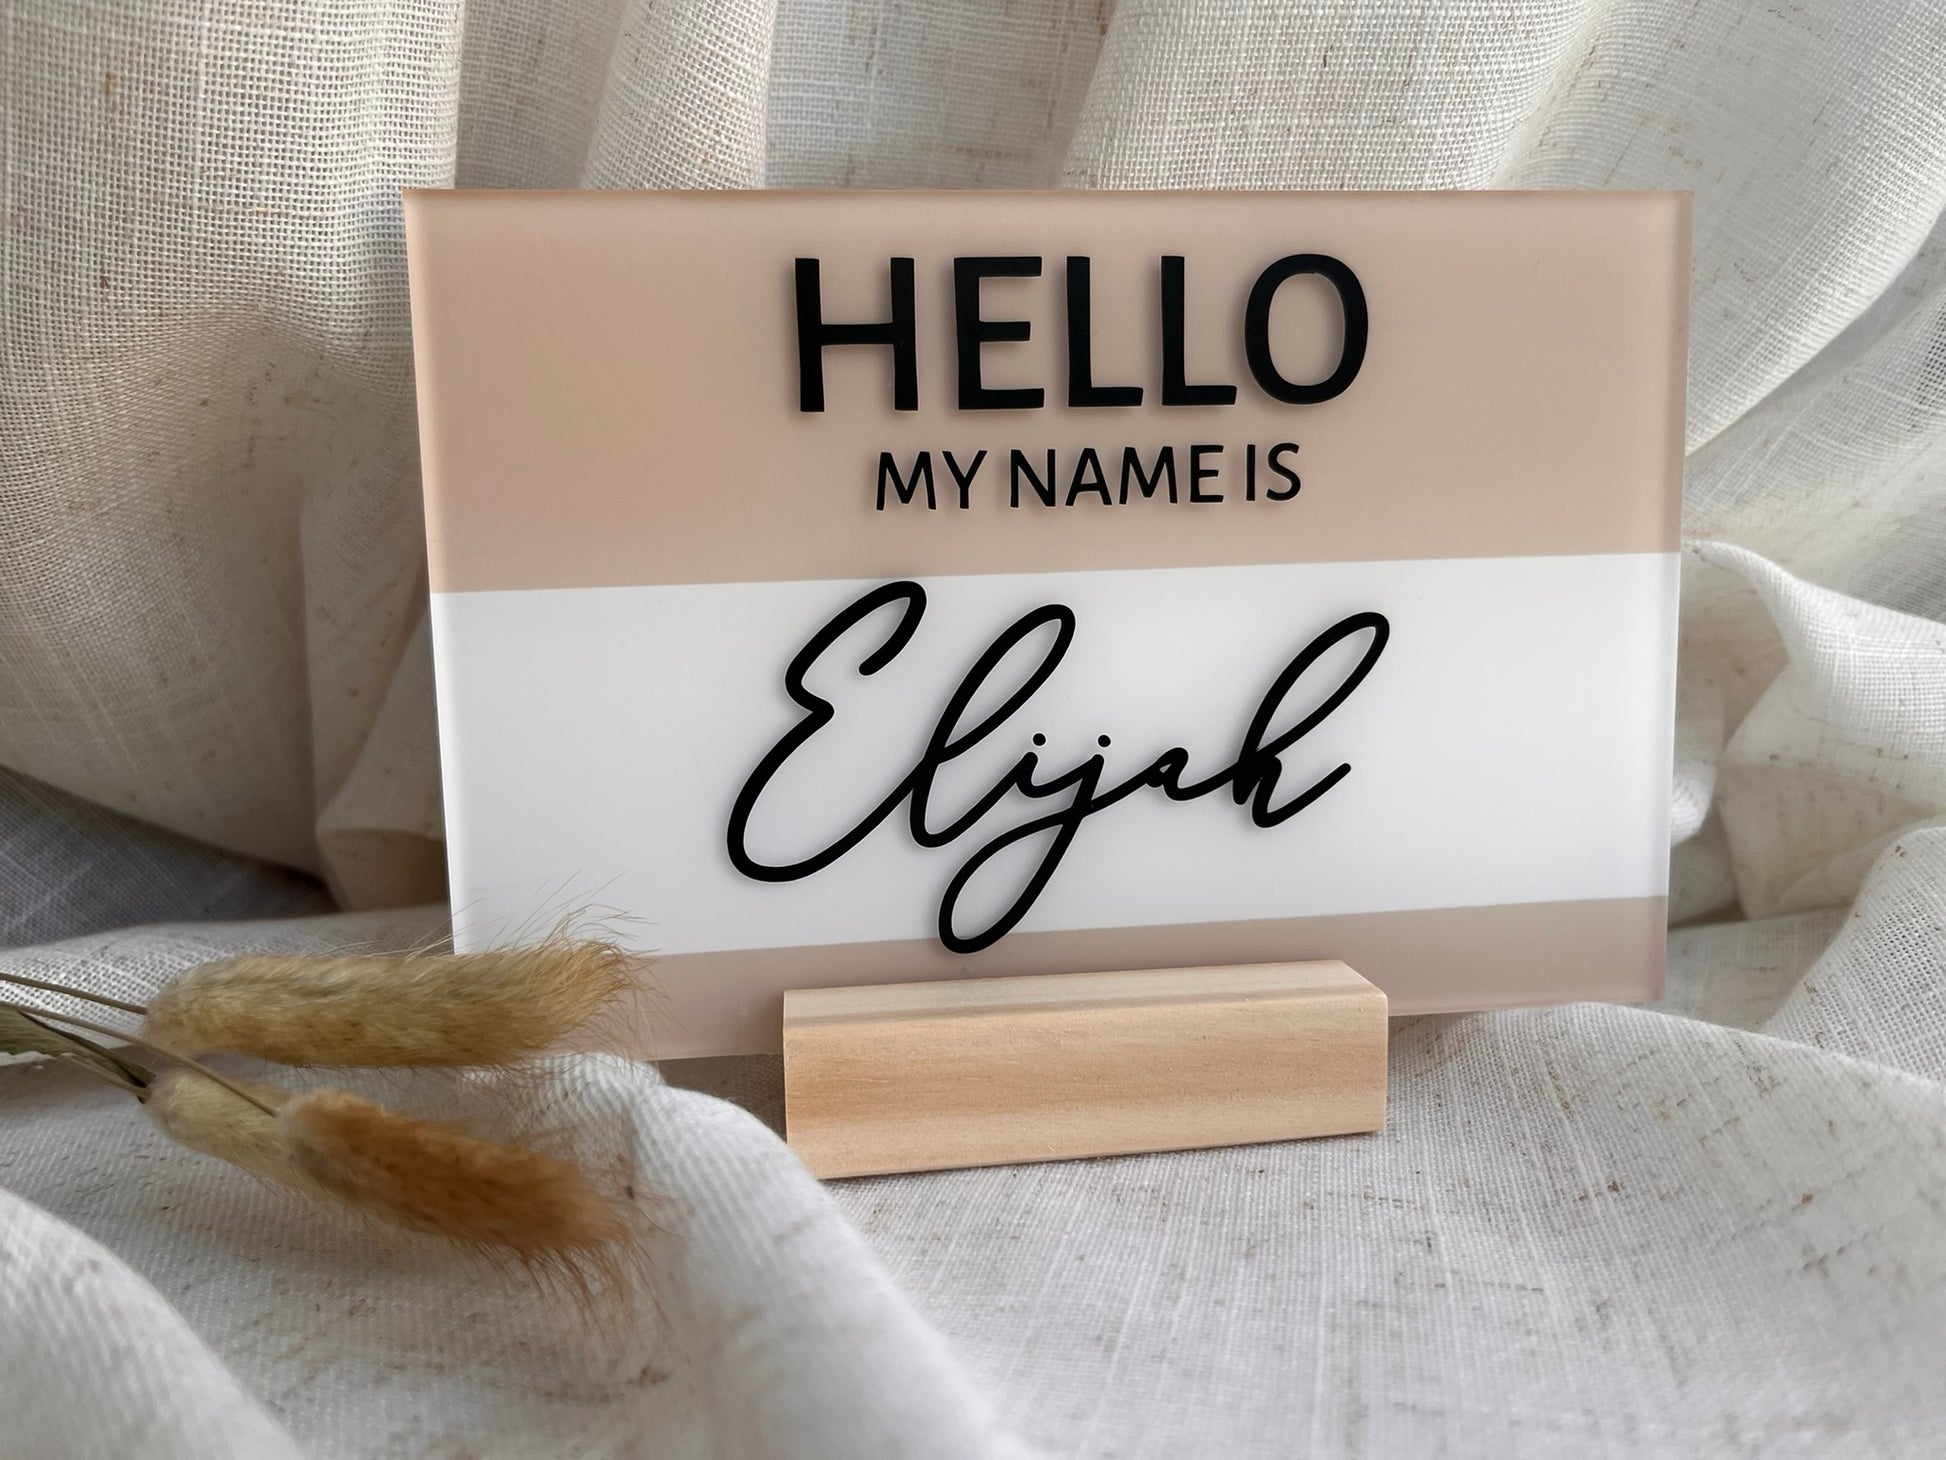 Hello My Name is Louis Name Tag  Poster for Sale by Cafecreative